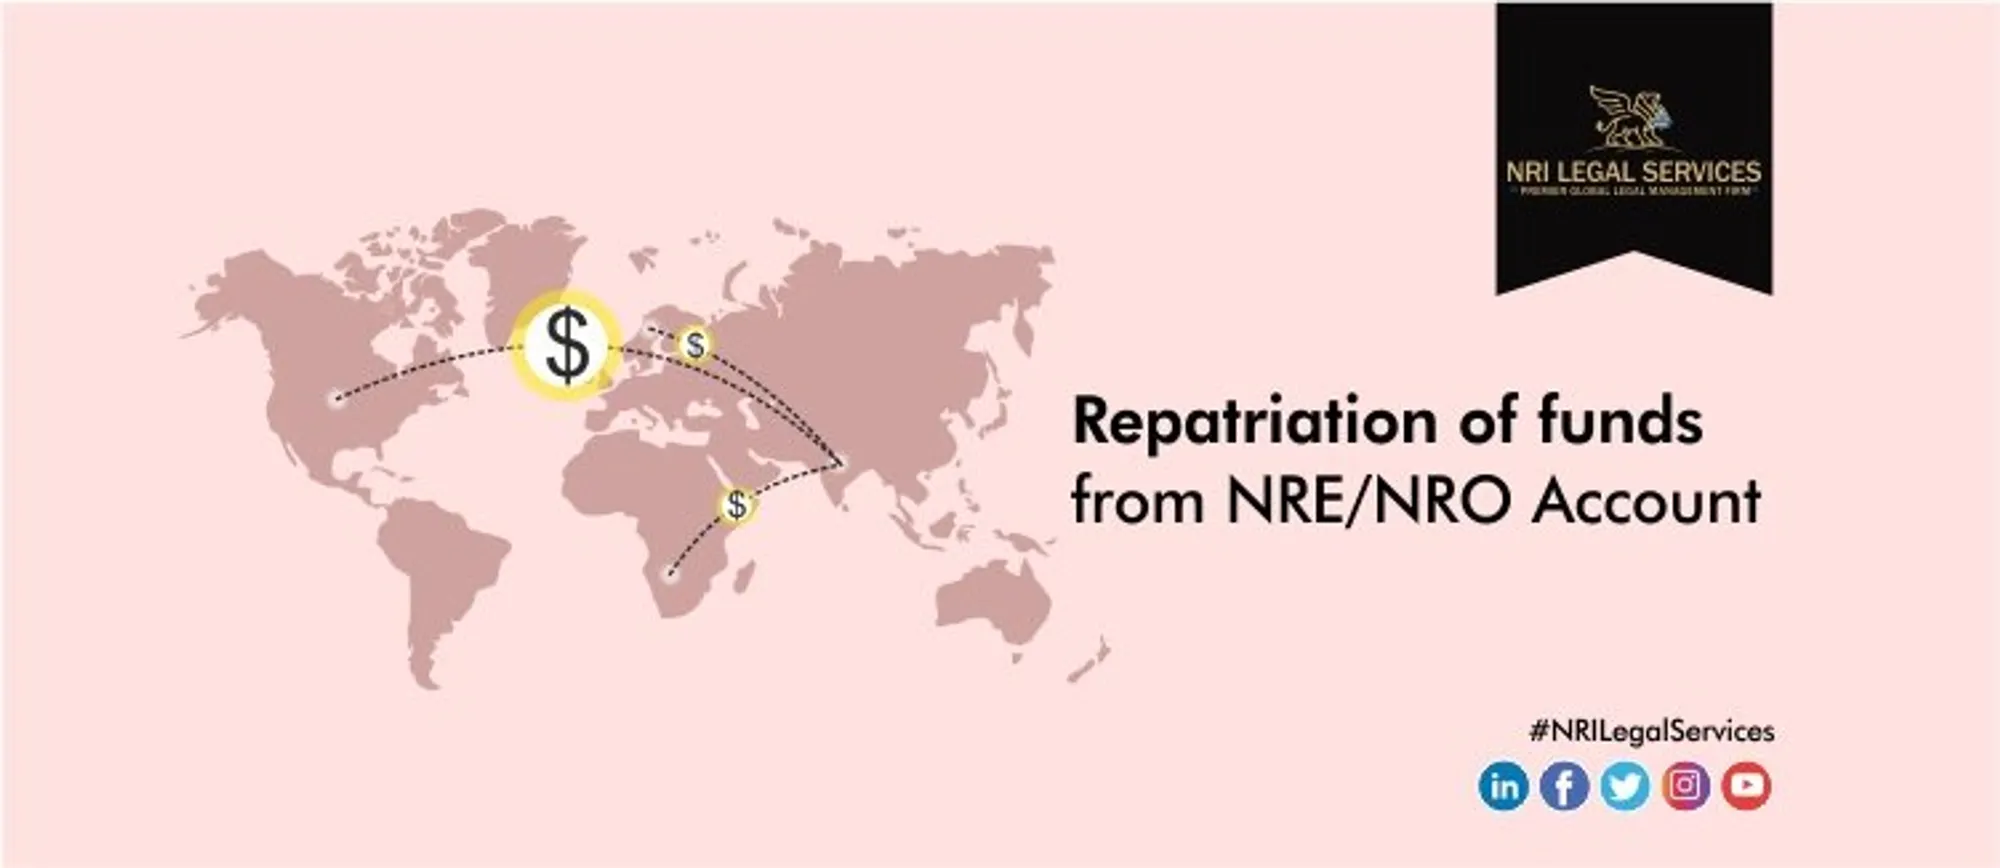 Repatriation of funds from NRE/NRO Account